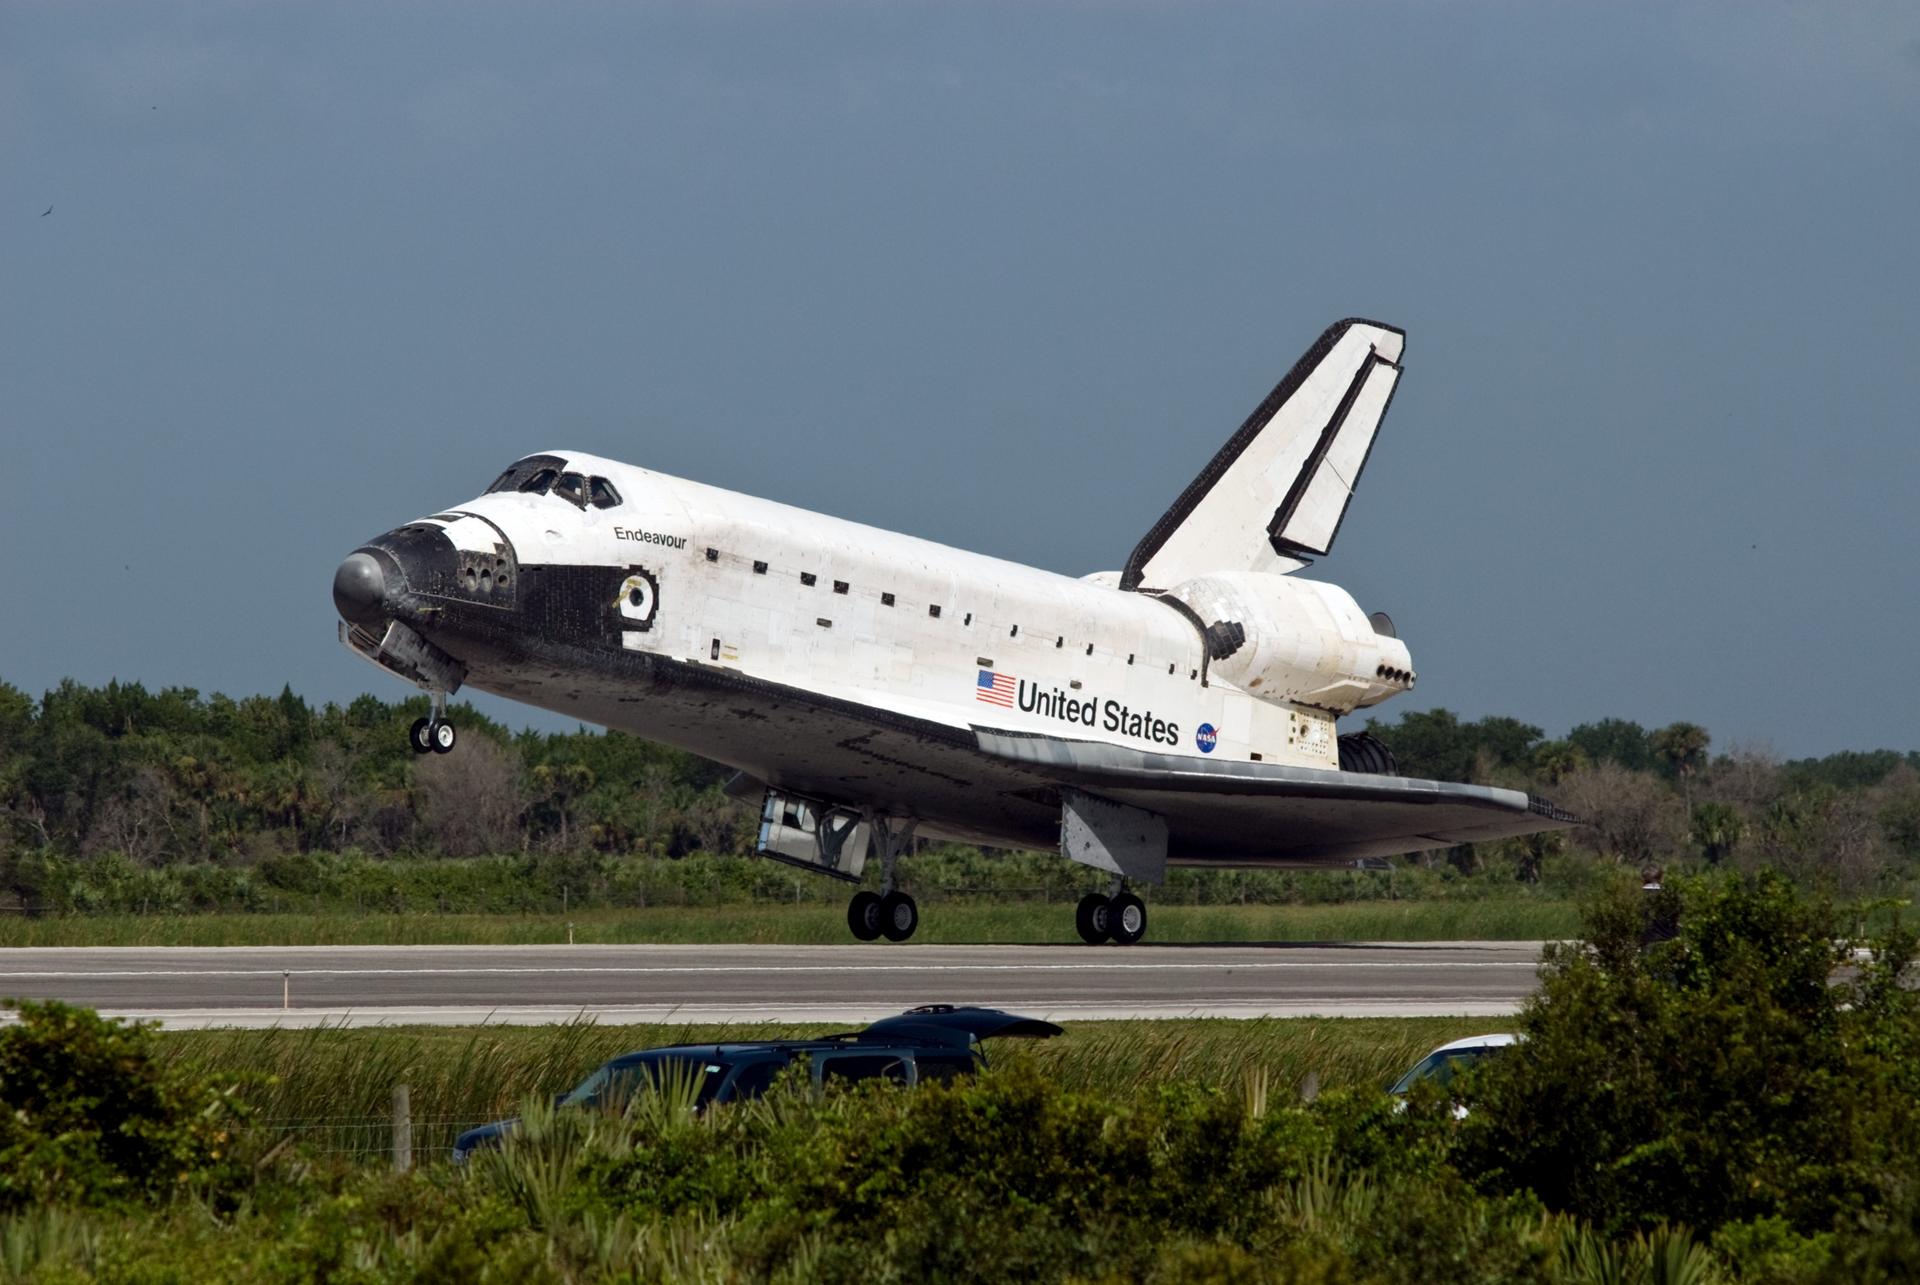 Endeavour taking off